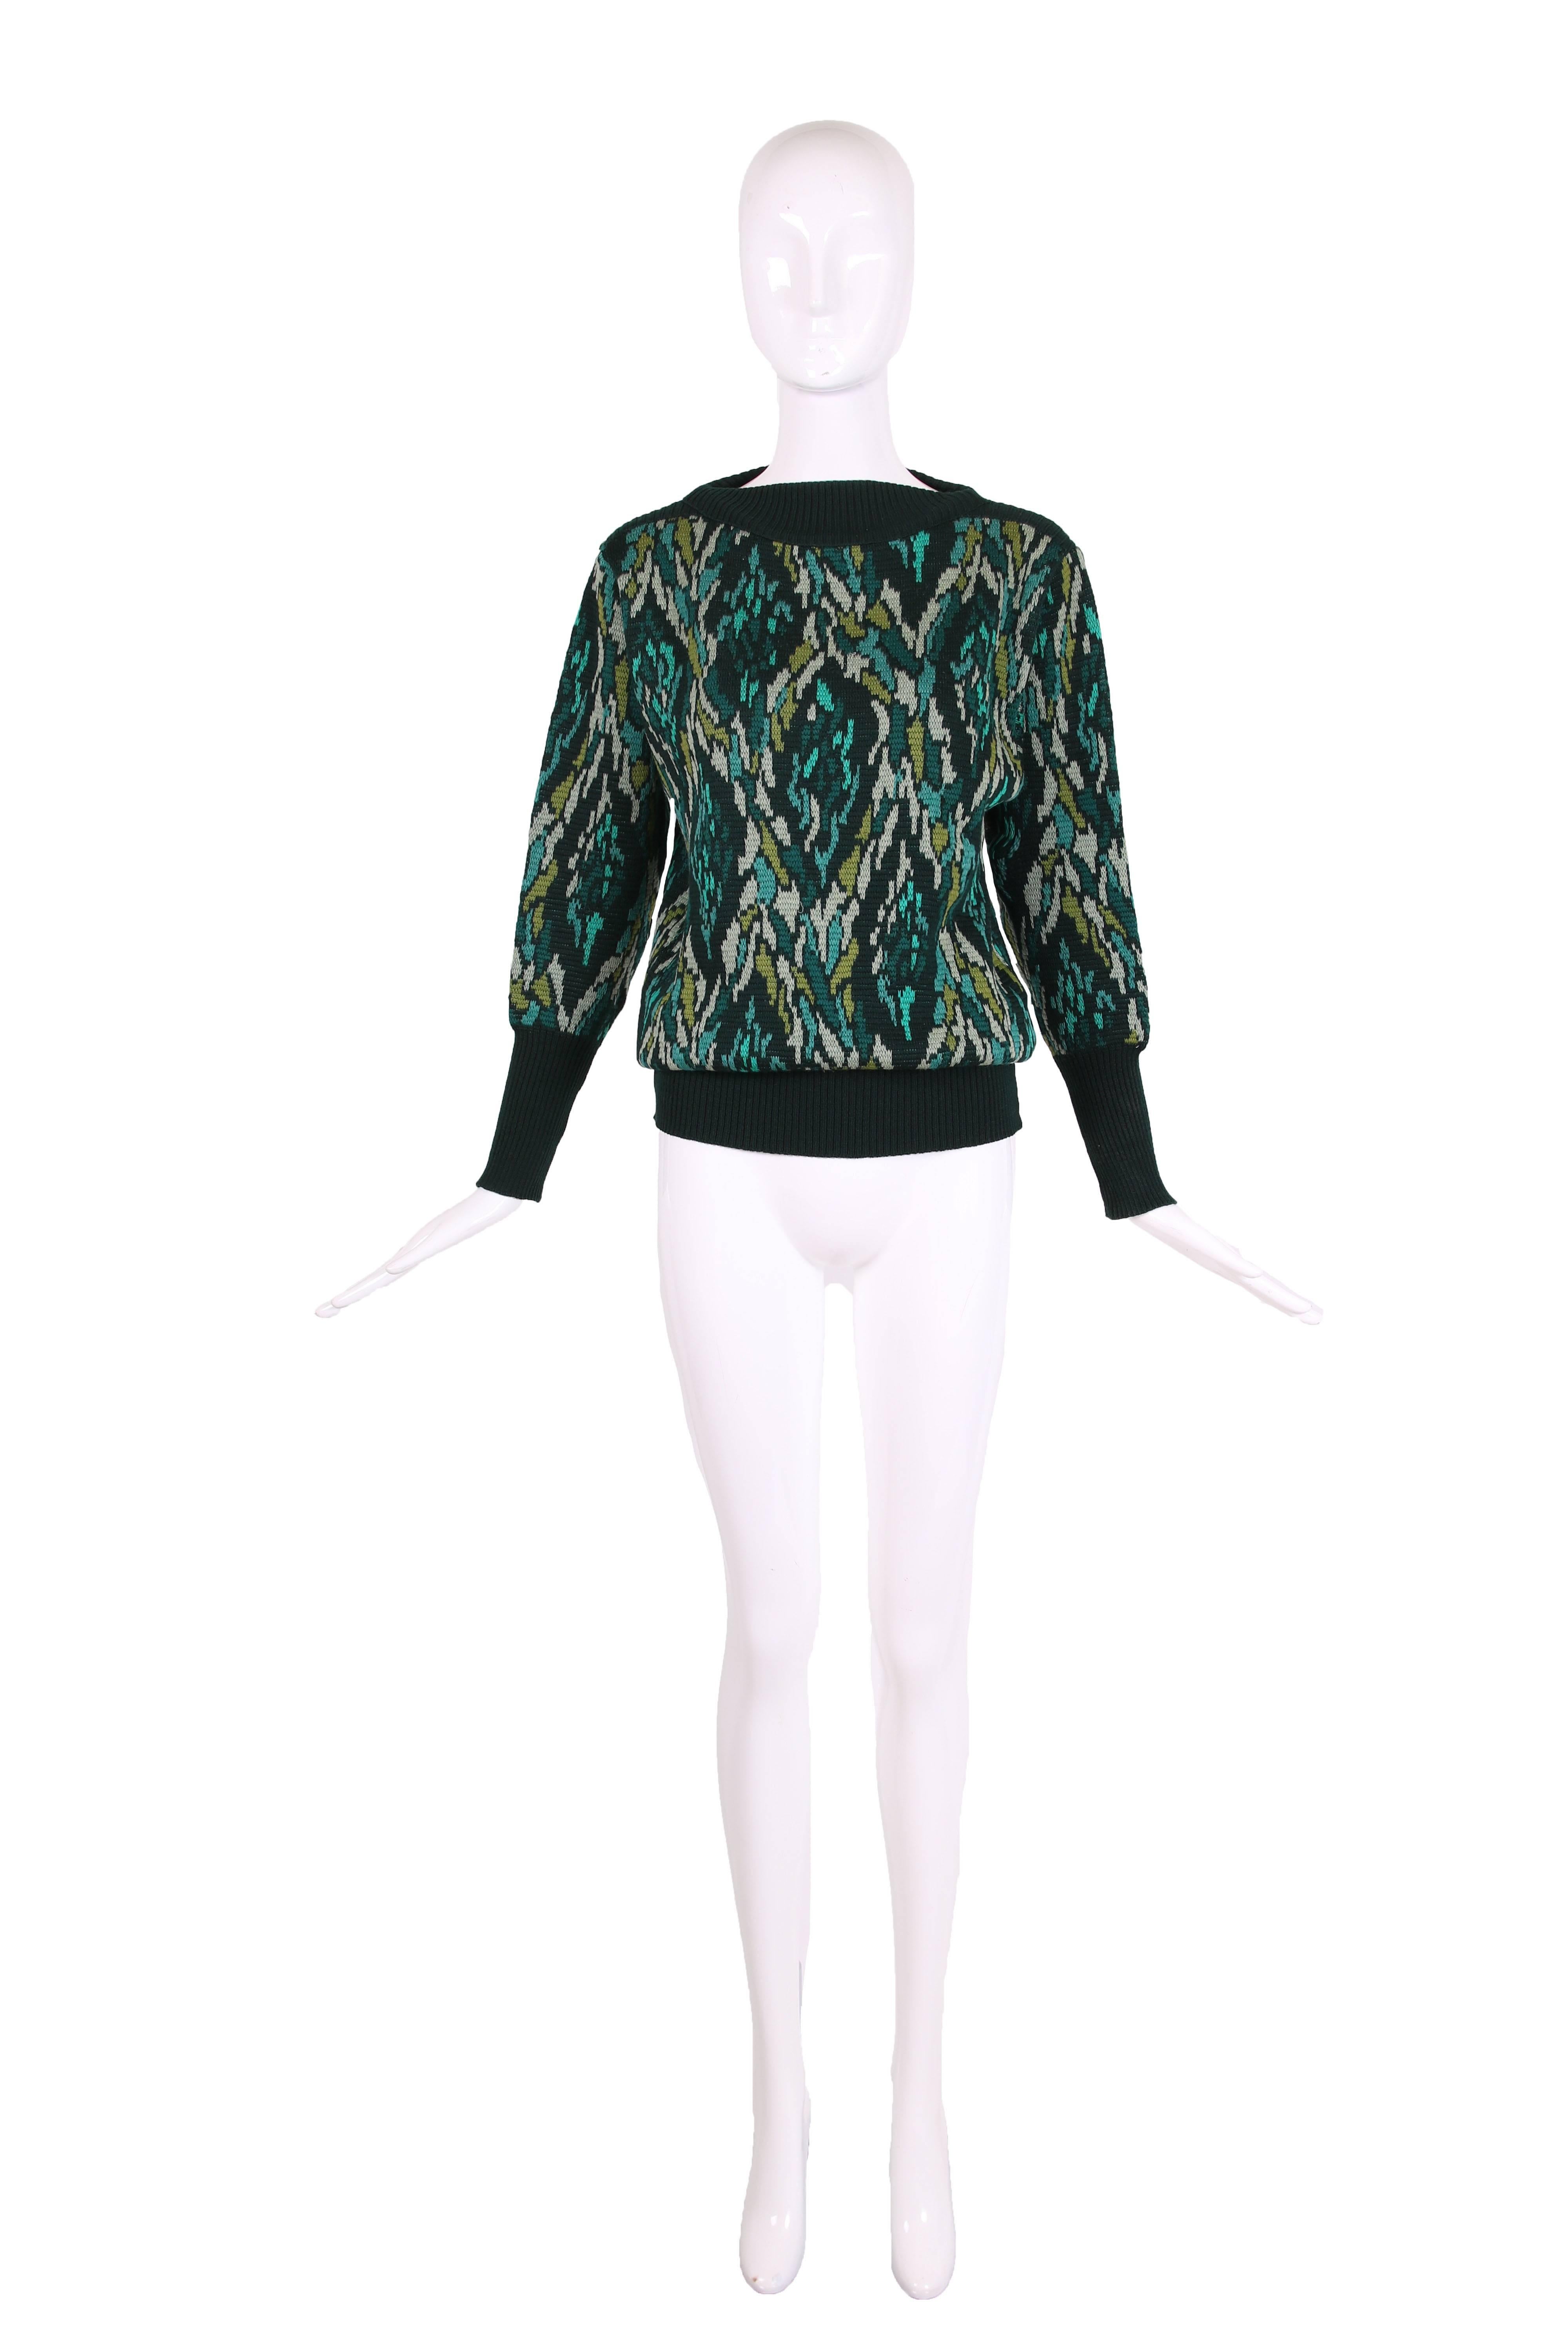 Vintage Yves Saint Laurent abstract patterned knit sweater in shades of blue and green. Dark green ribbing at neckline, cuffs and hem. Sweater is in excellent condition - label is cut out in the middle but is clearly Yves Saint Laurent based on the